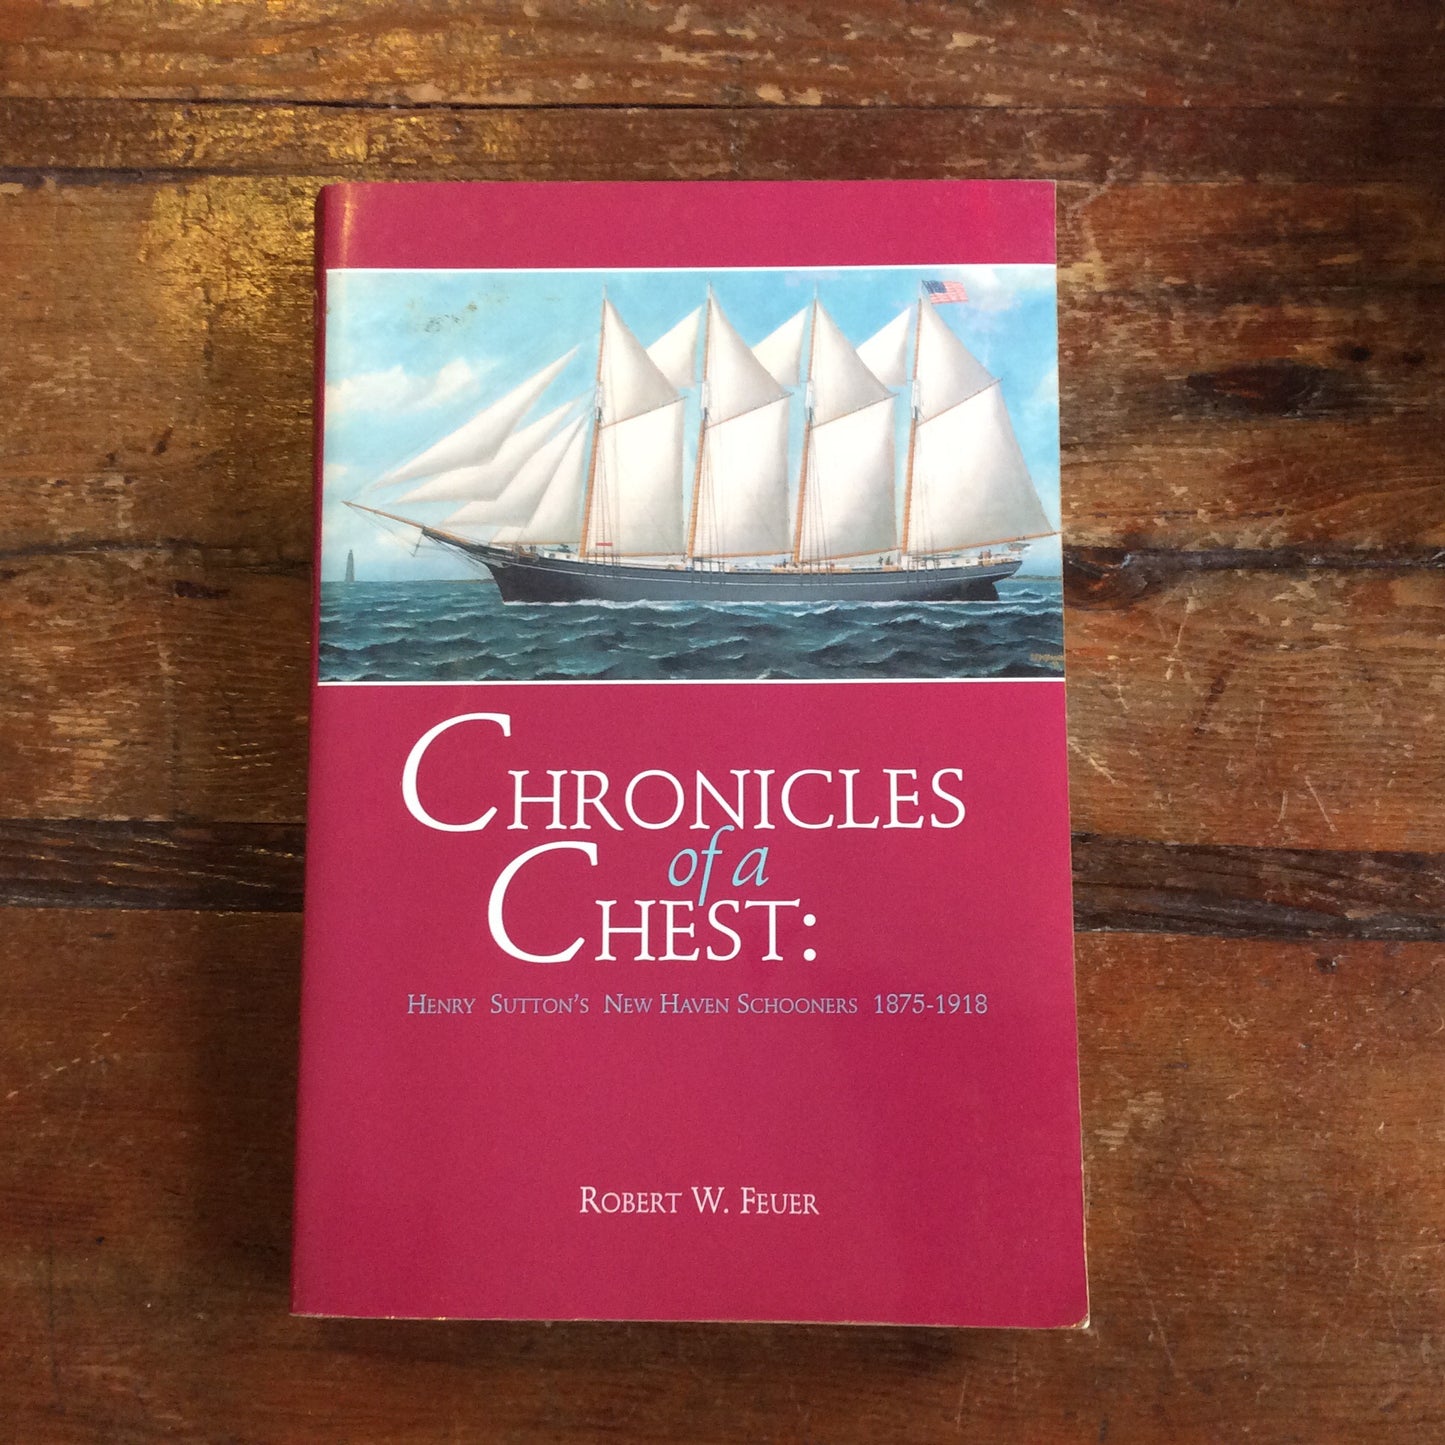 Book, "Chronicles of a Chest: Henry Sutton's New Haven Schooners 1875-1918" Signed copy